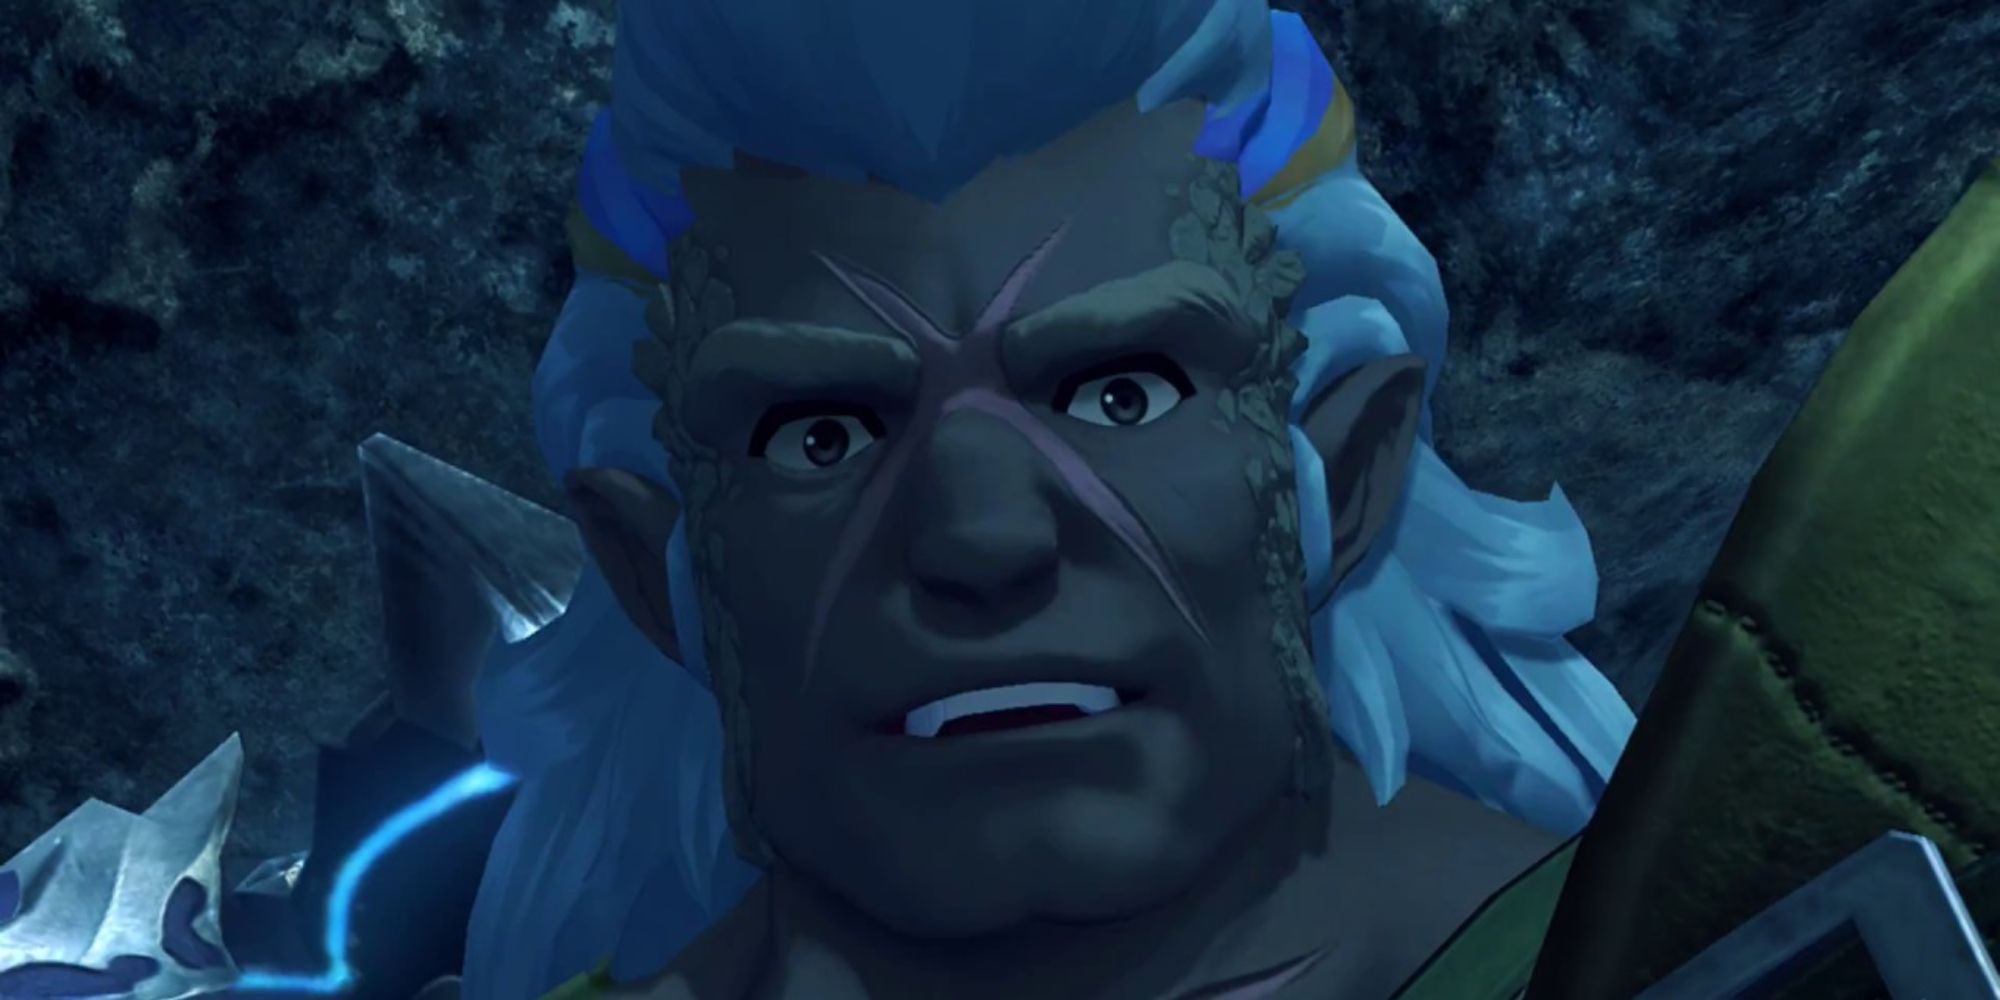 Xenoblade Chronicles 2 Characters extreme close up of Vandham smiling to someone off screen against a rocky background